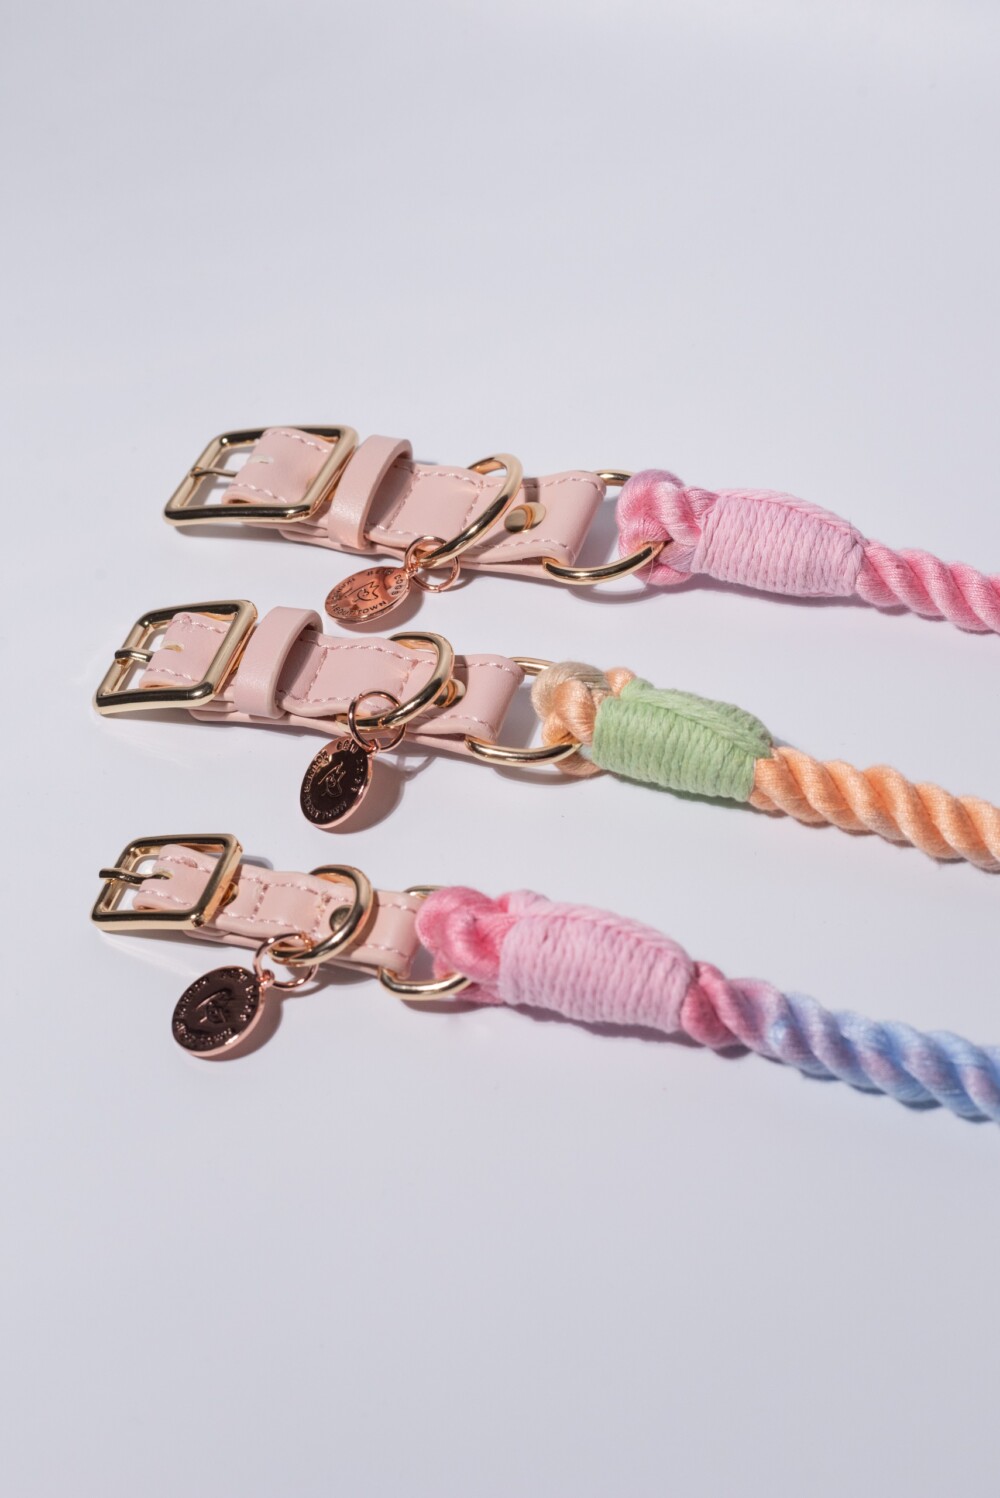 Three rainbow rope collars in different pastel shades, against a white background